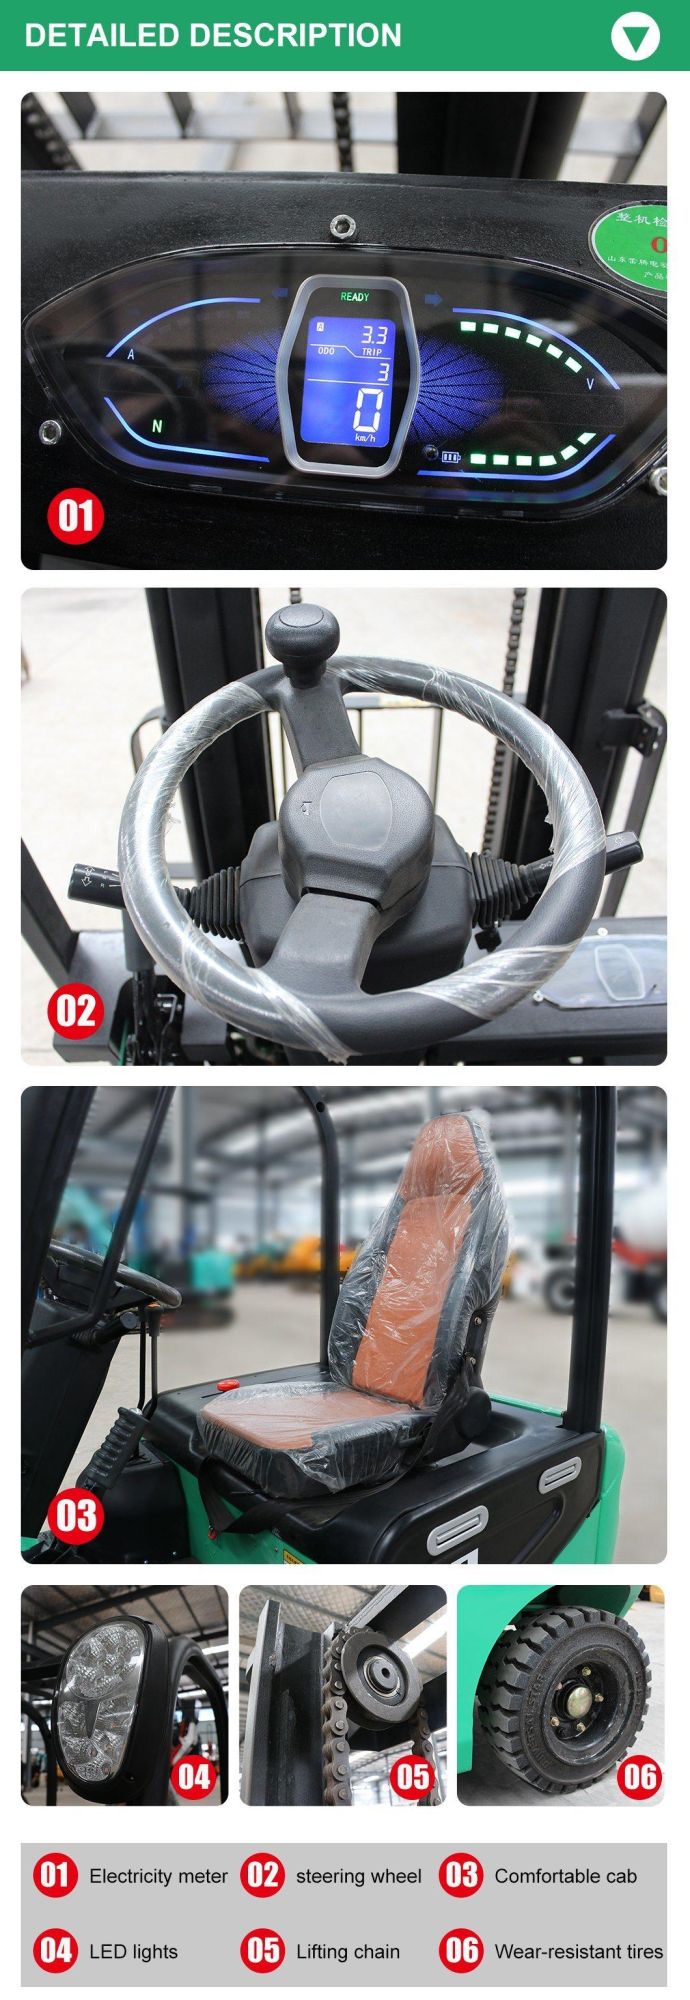 Ceapproved 1500 Kg 1.5 Ton Electric Forklift 1.5 T Electric Forklift with 3-6 M Lifting Height